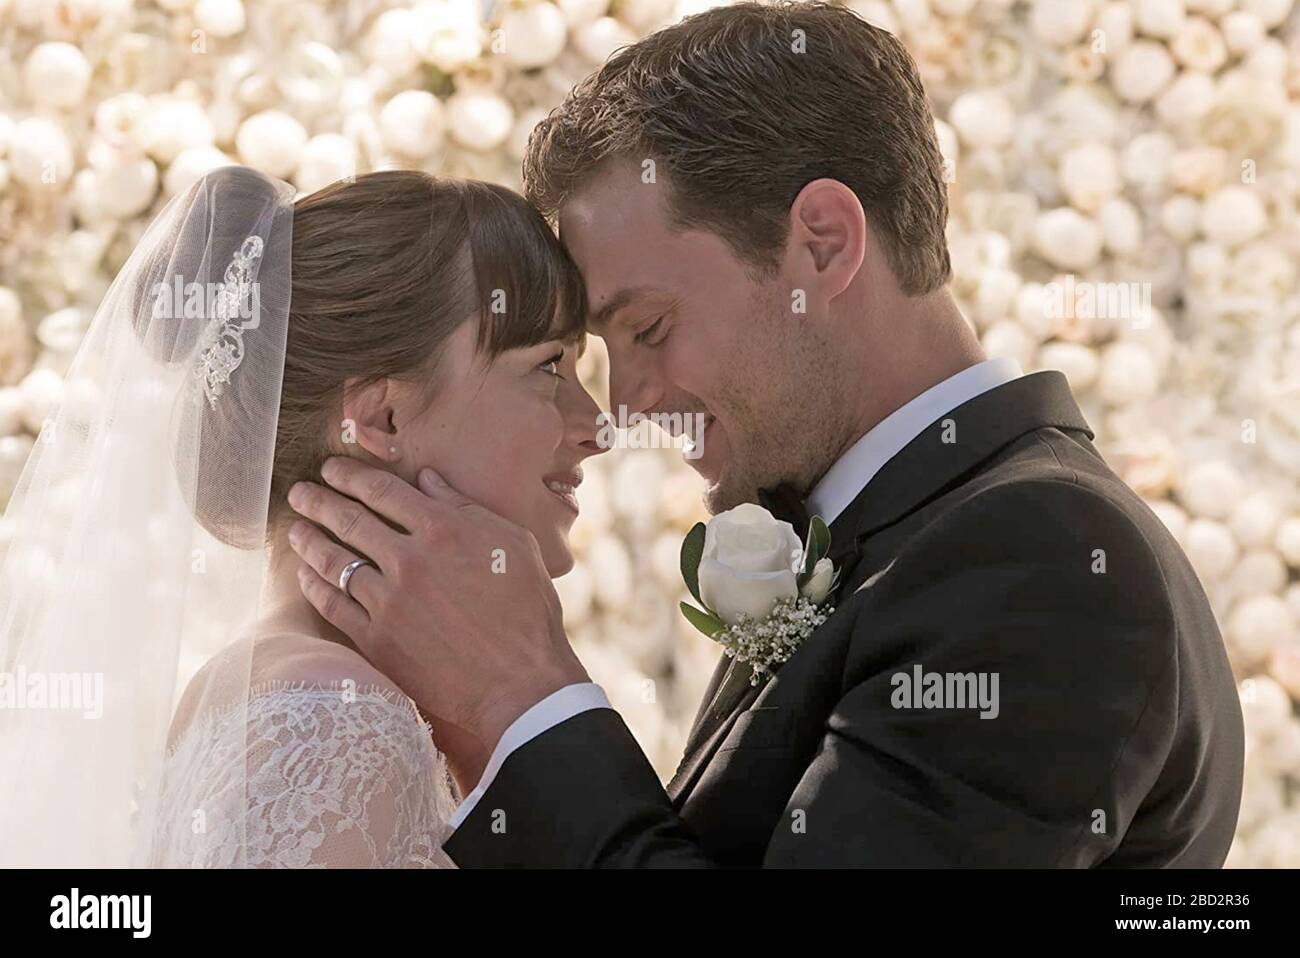 FIFTY SHADES FREED 2018 Universal Pictures film with Dakota Johnson and Jamie Doman Stock Photo